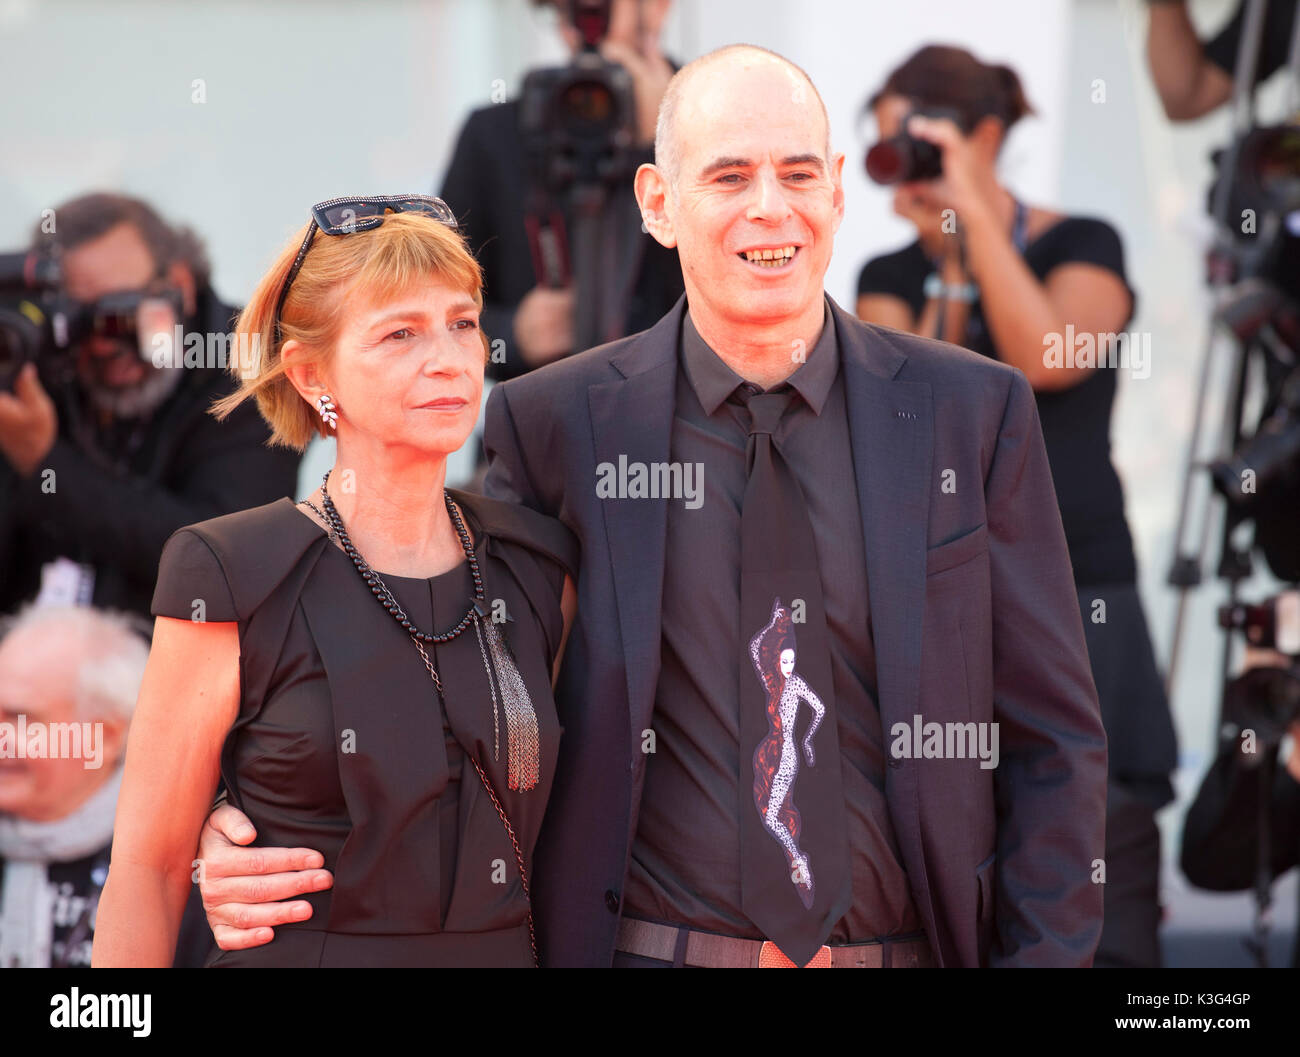 Venice, Italy. 02nd Sep, 2017. Laura Maoz and Samuel Maoz at the premiere of the film Foxtrot at the 74th Venice Film Festival, Sala Grande on Saturday 2 September 2017, Venice Lido, Italy. Credit: Doreen Kennedy/Alamy Live News Stock Photo